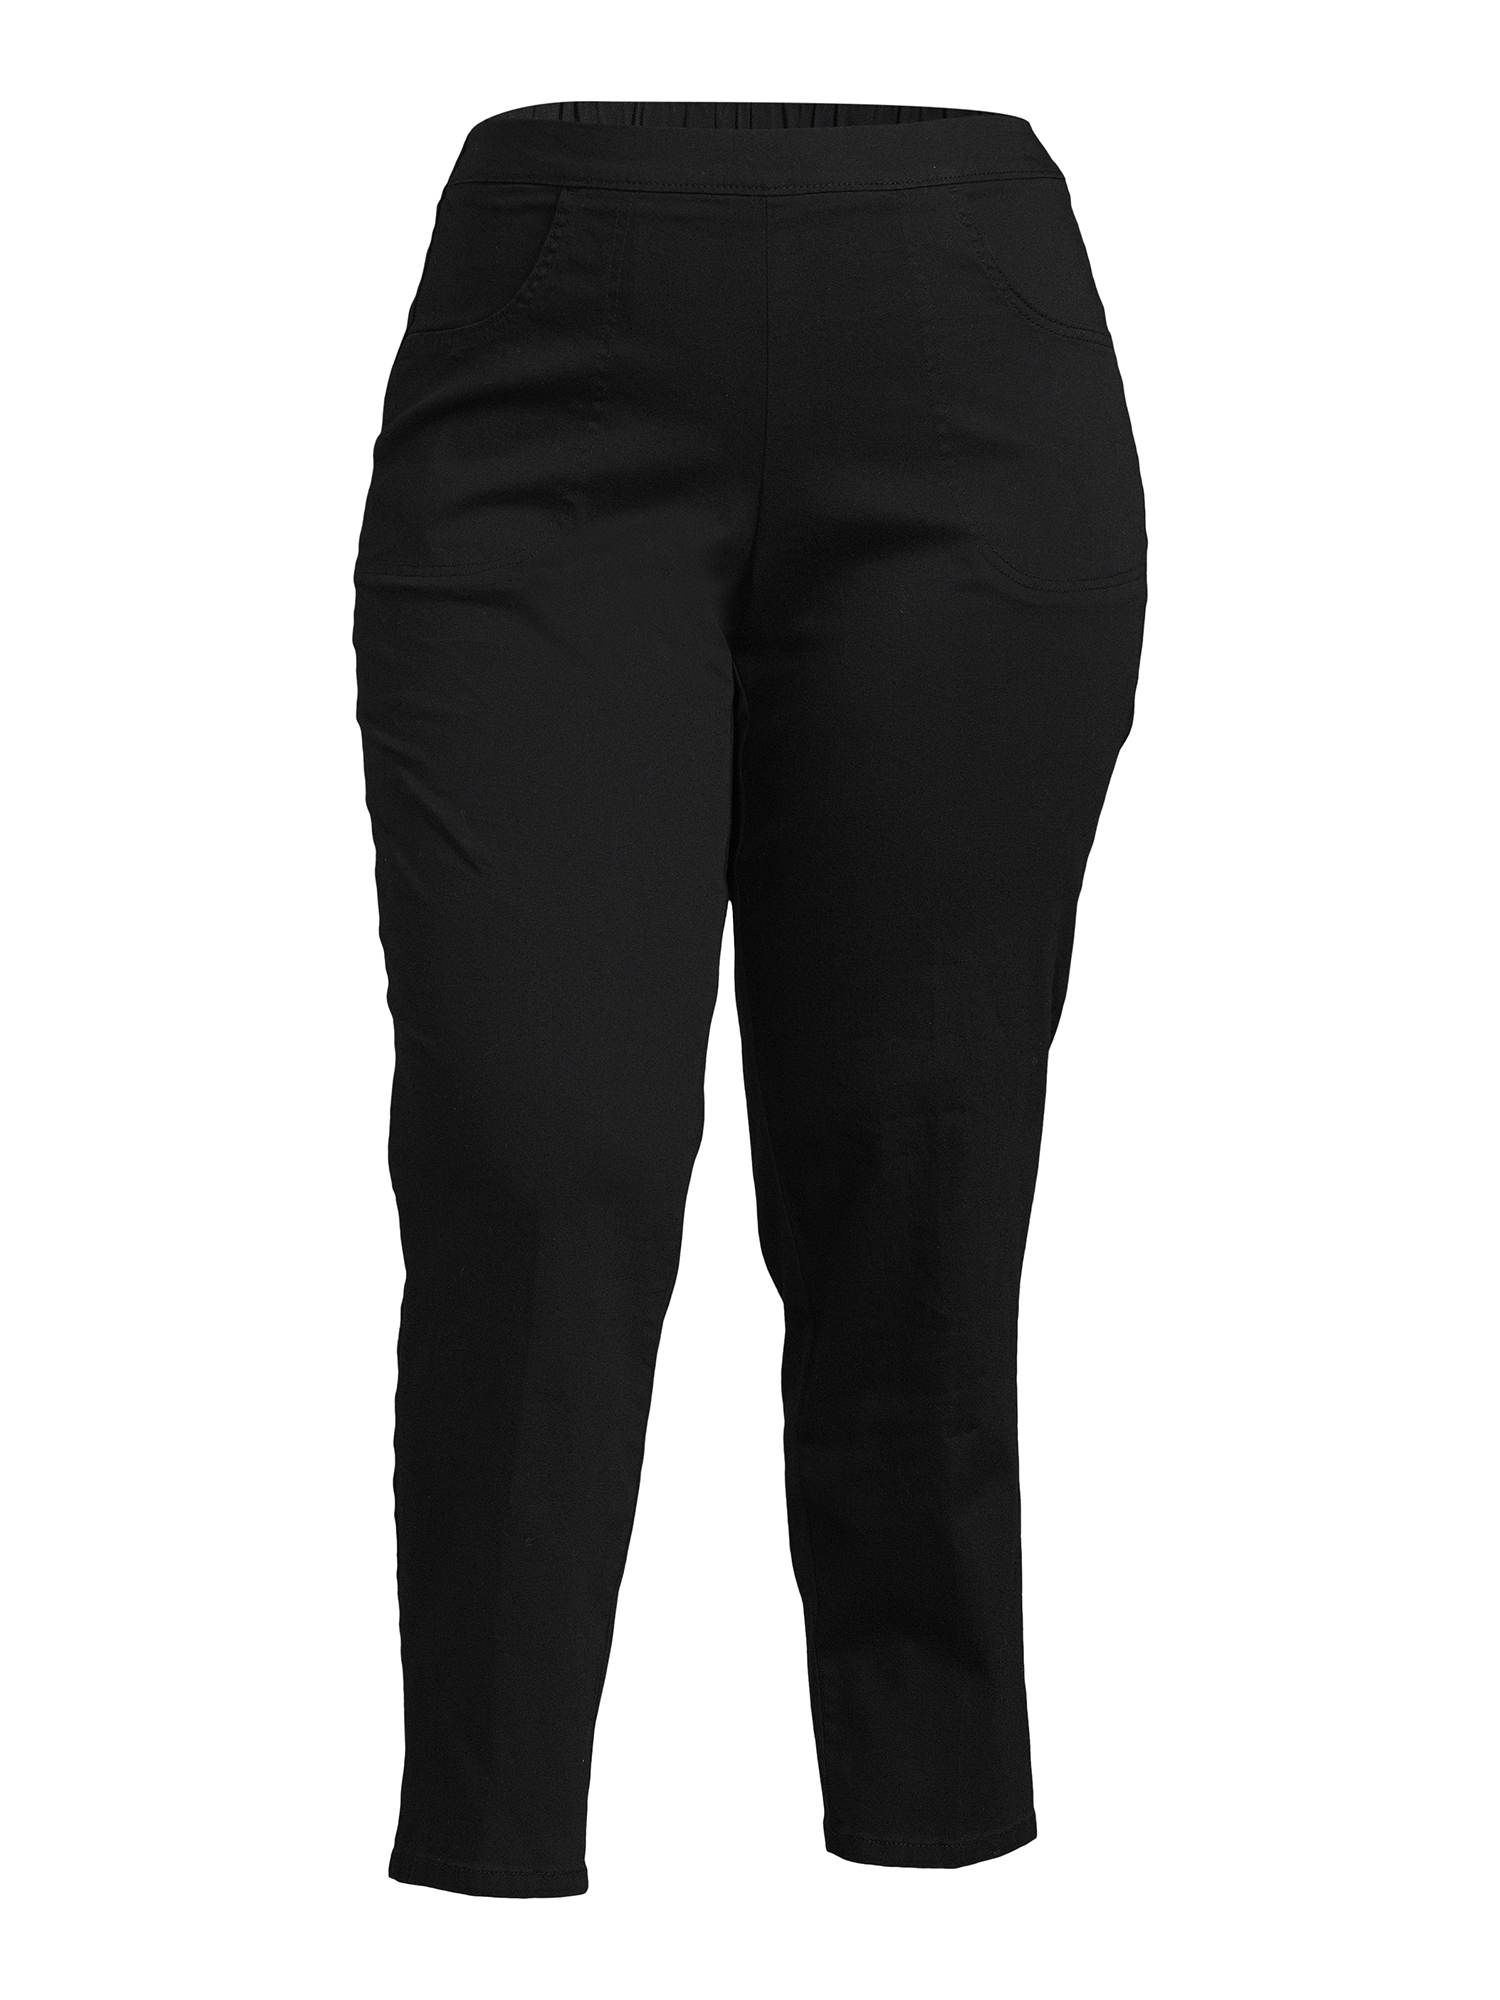 Just My Size Women's Plus 2 Pocket Pull-On Pant - image 5 of 8